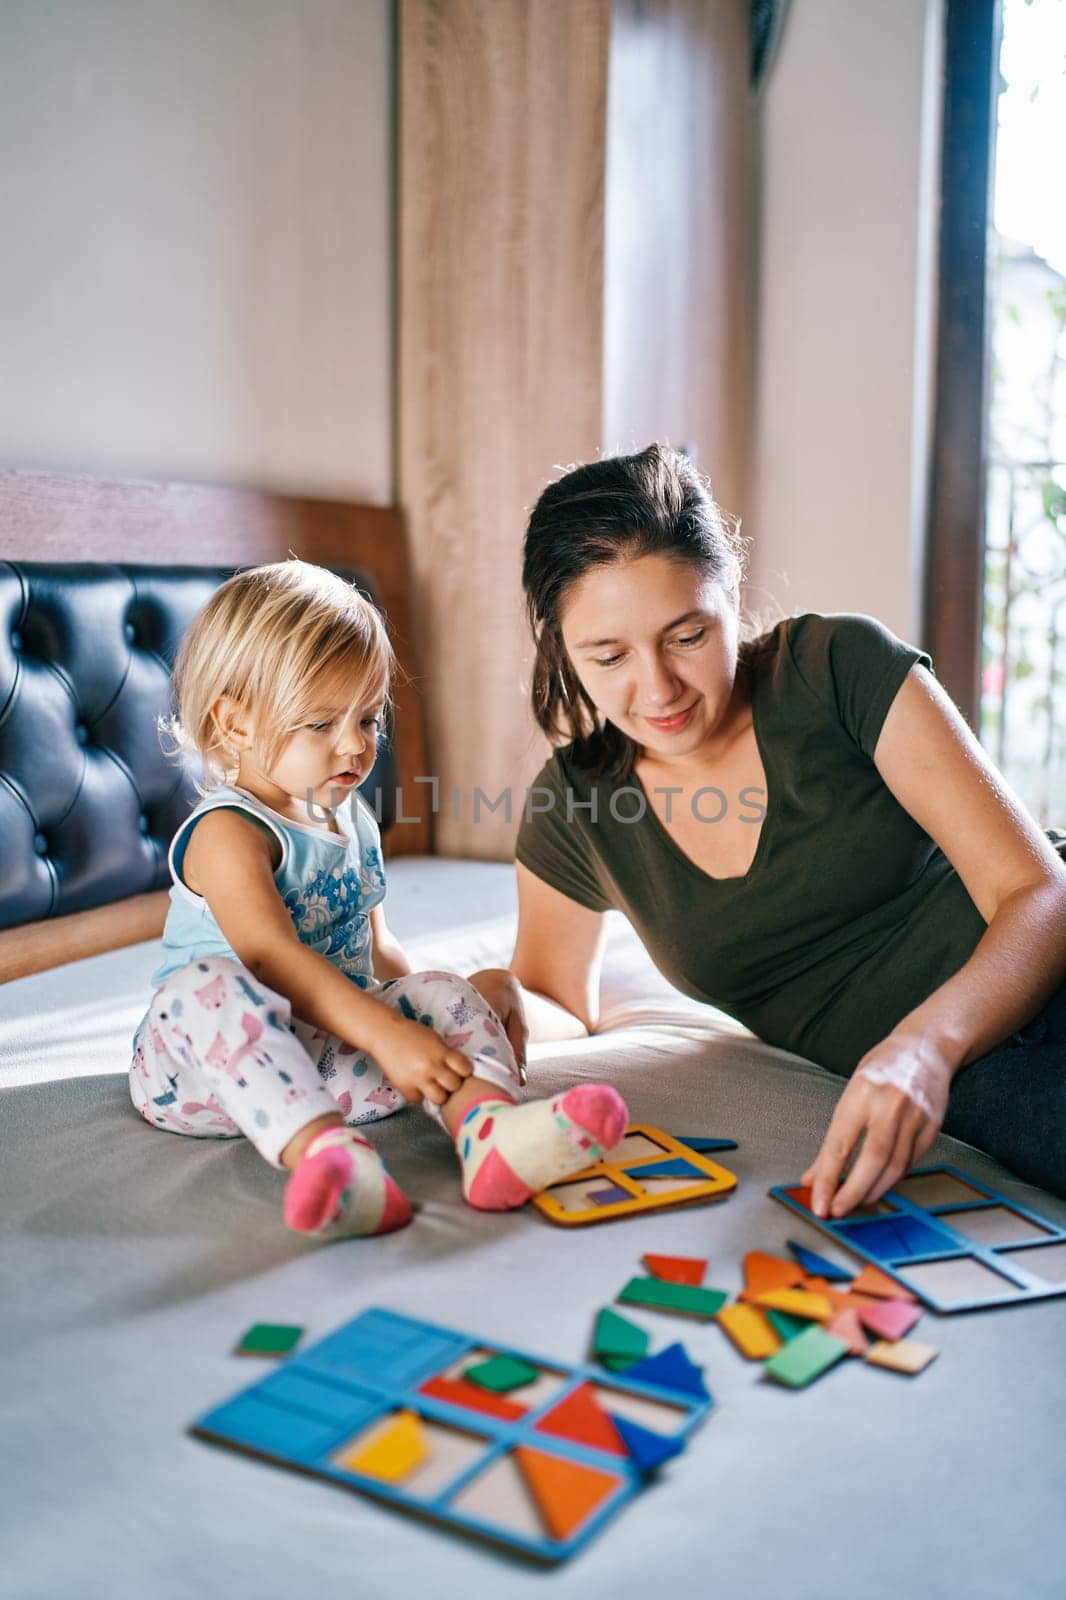 Little girl looks at her mother putting together a puzzle on the bed by Nadtochiy